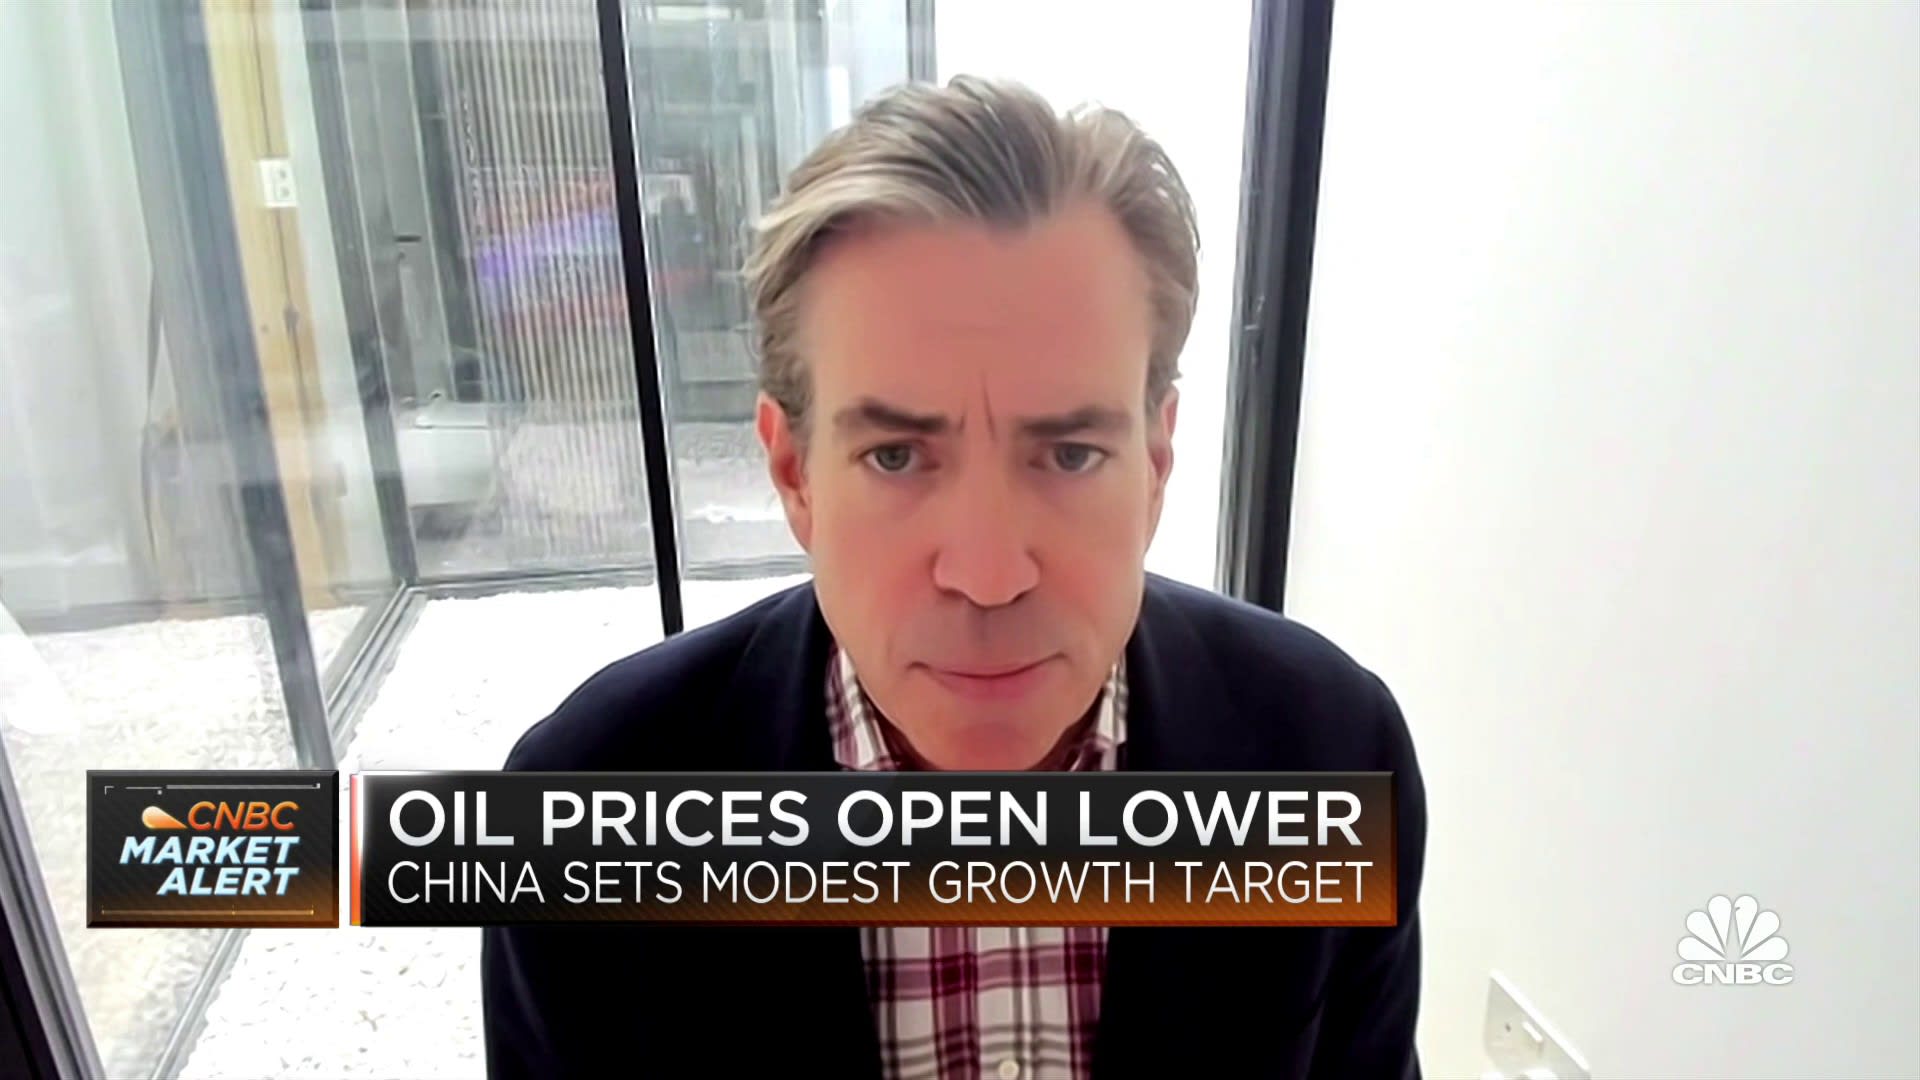 Goldman's Jeff Currie: Our Q4 target for oil is $100 a barrel